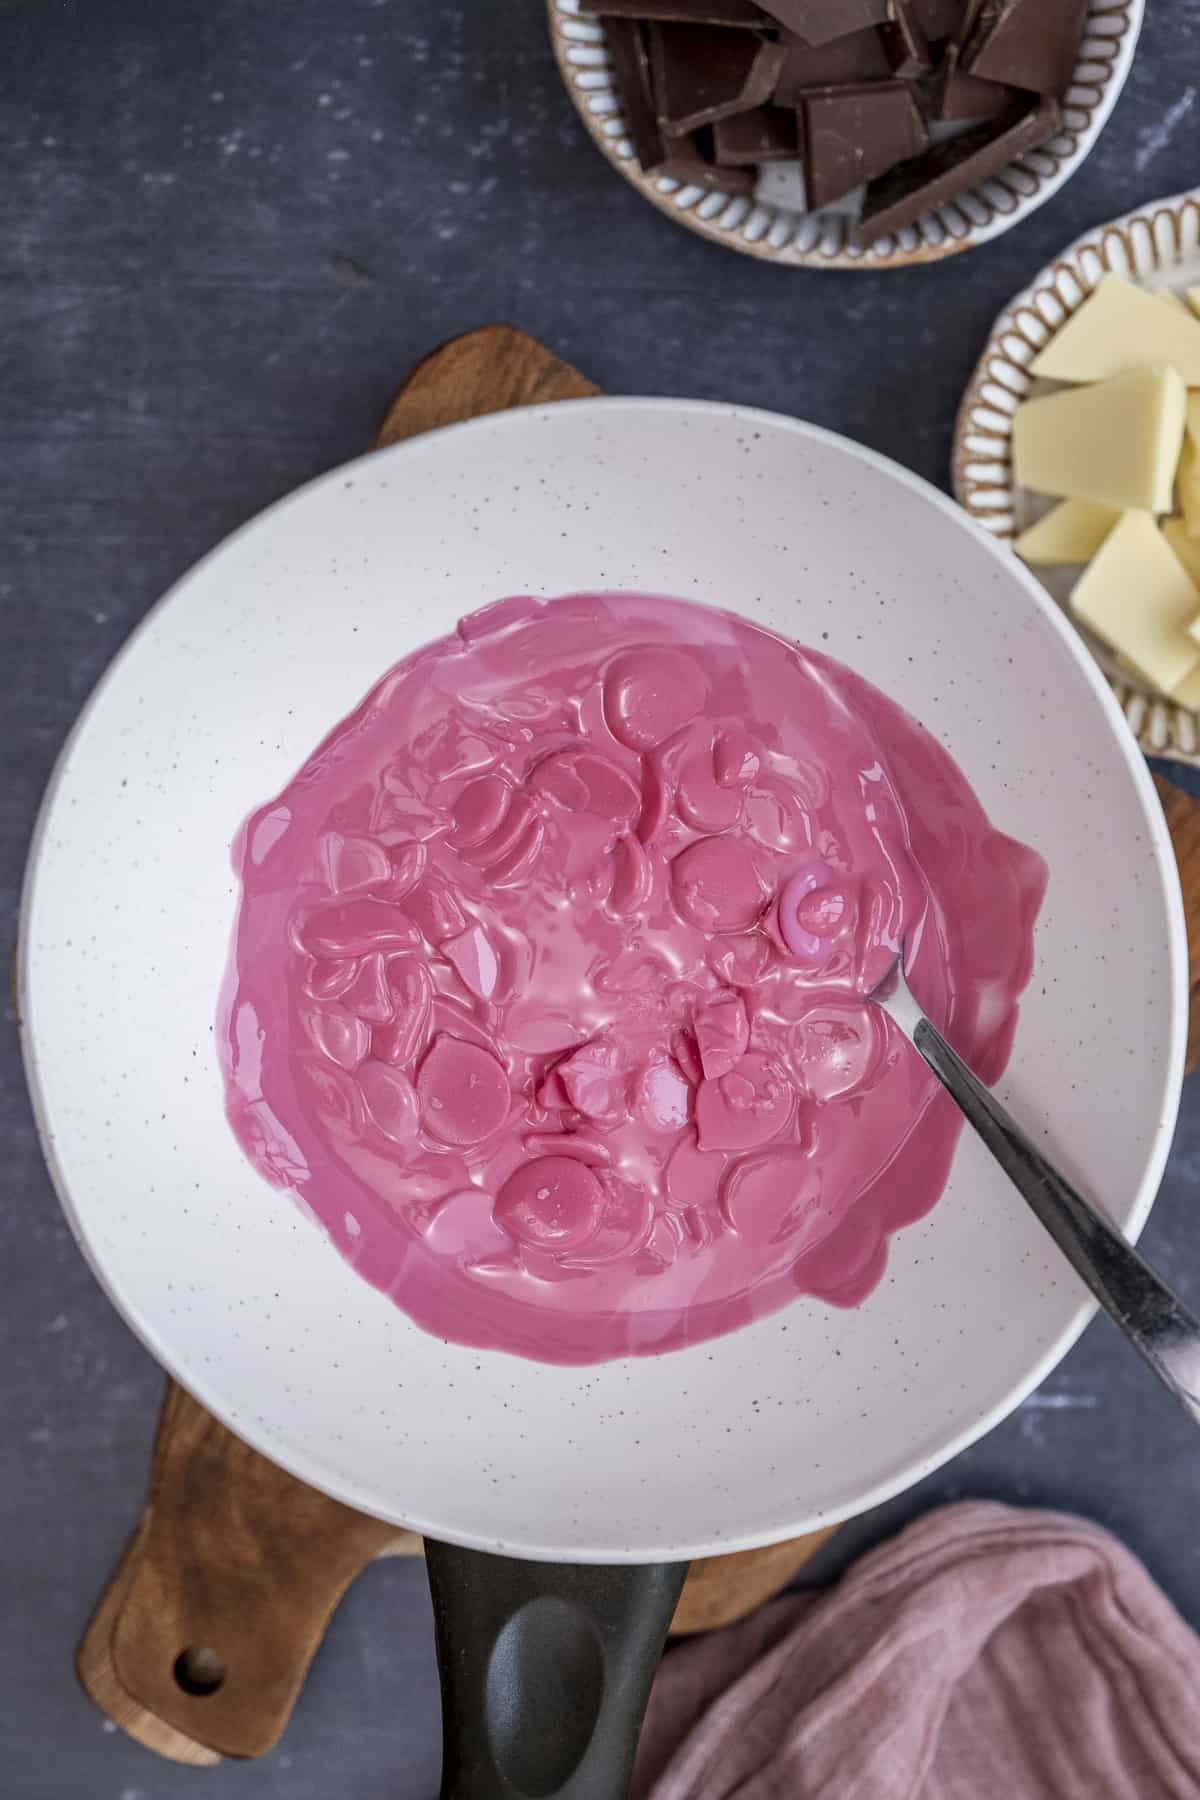 Pink candy melts melting in a white ceramic bowl over a saucepan and a spoon inside it.